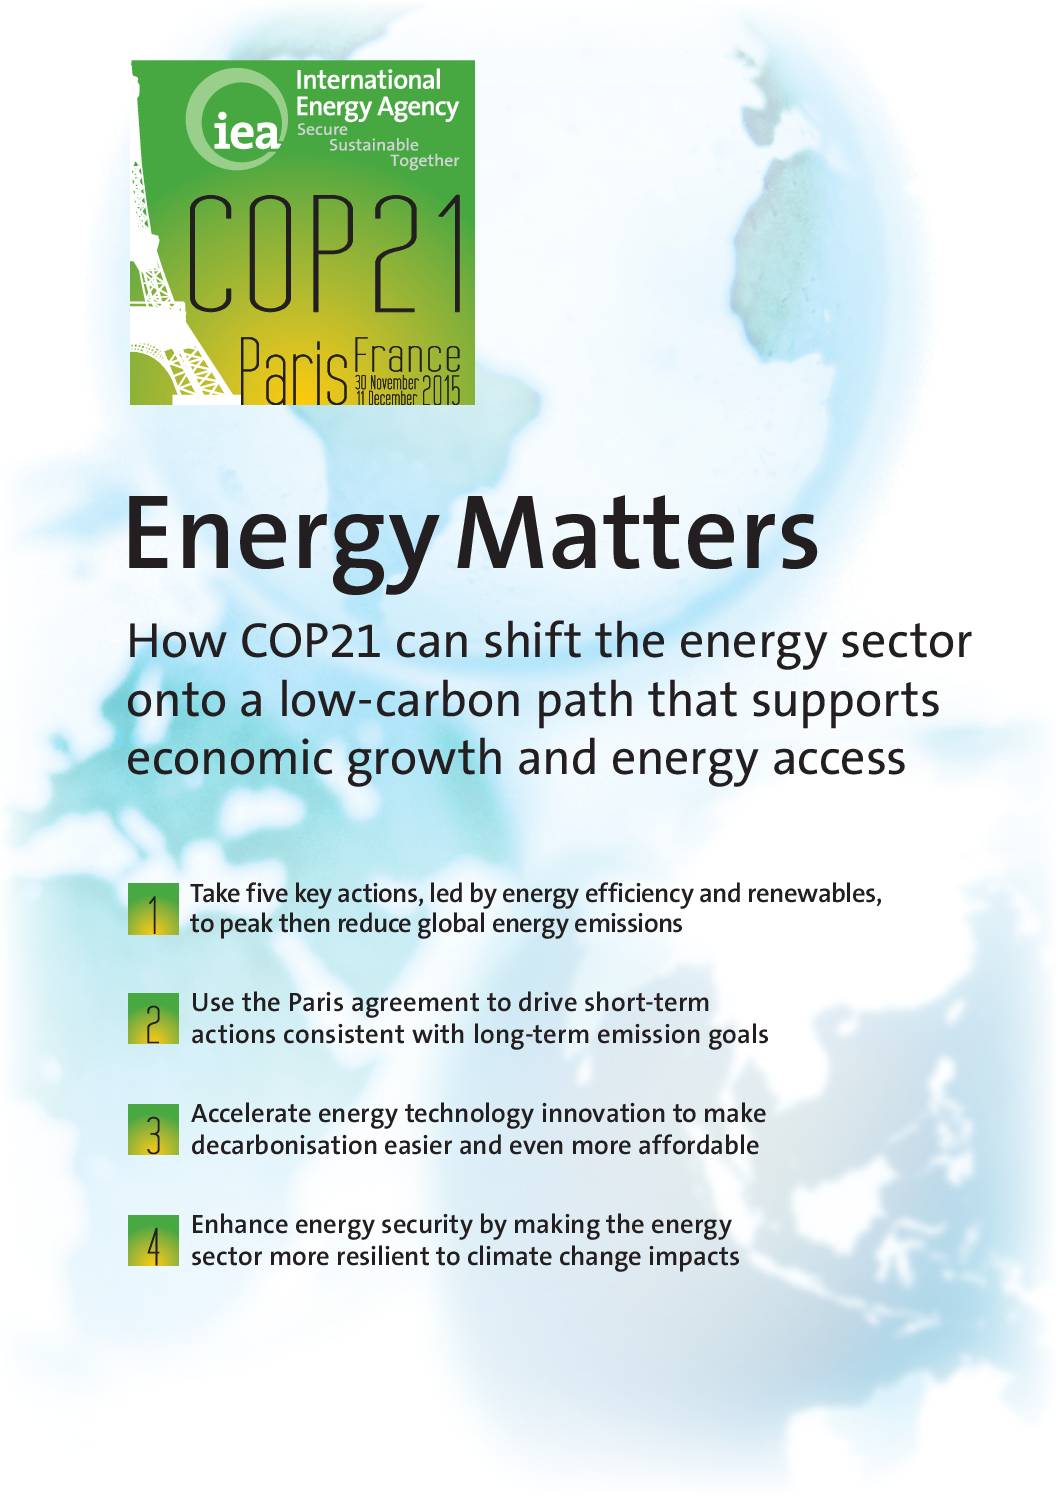 Energy Matters: How COP21 can shift the energy sector onto a low-carbon path that supports economic growth and energy access